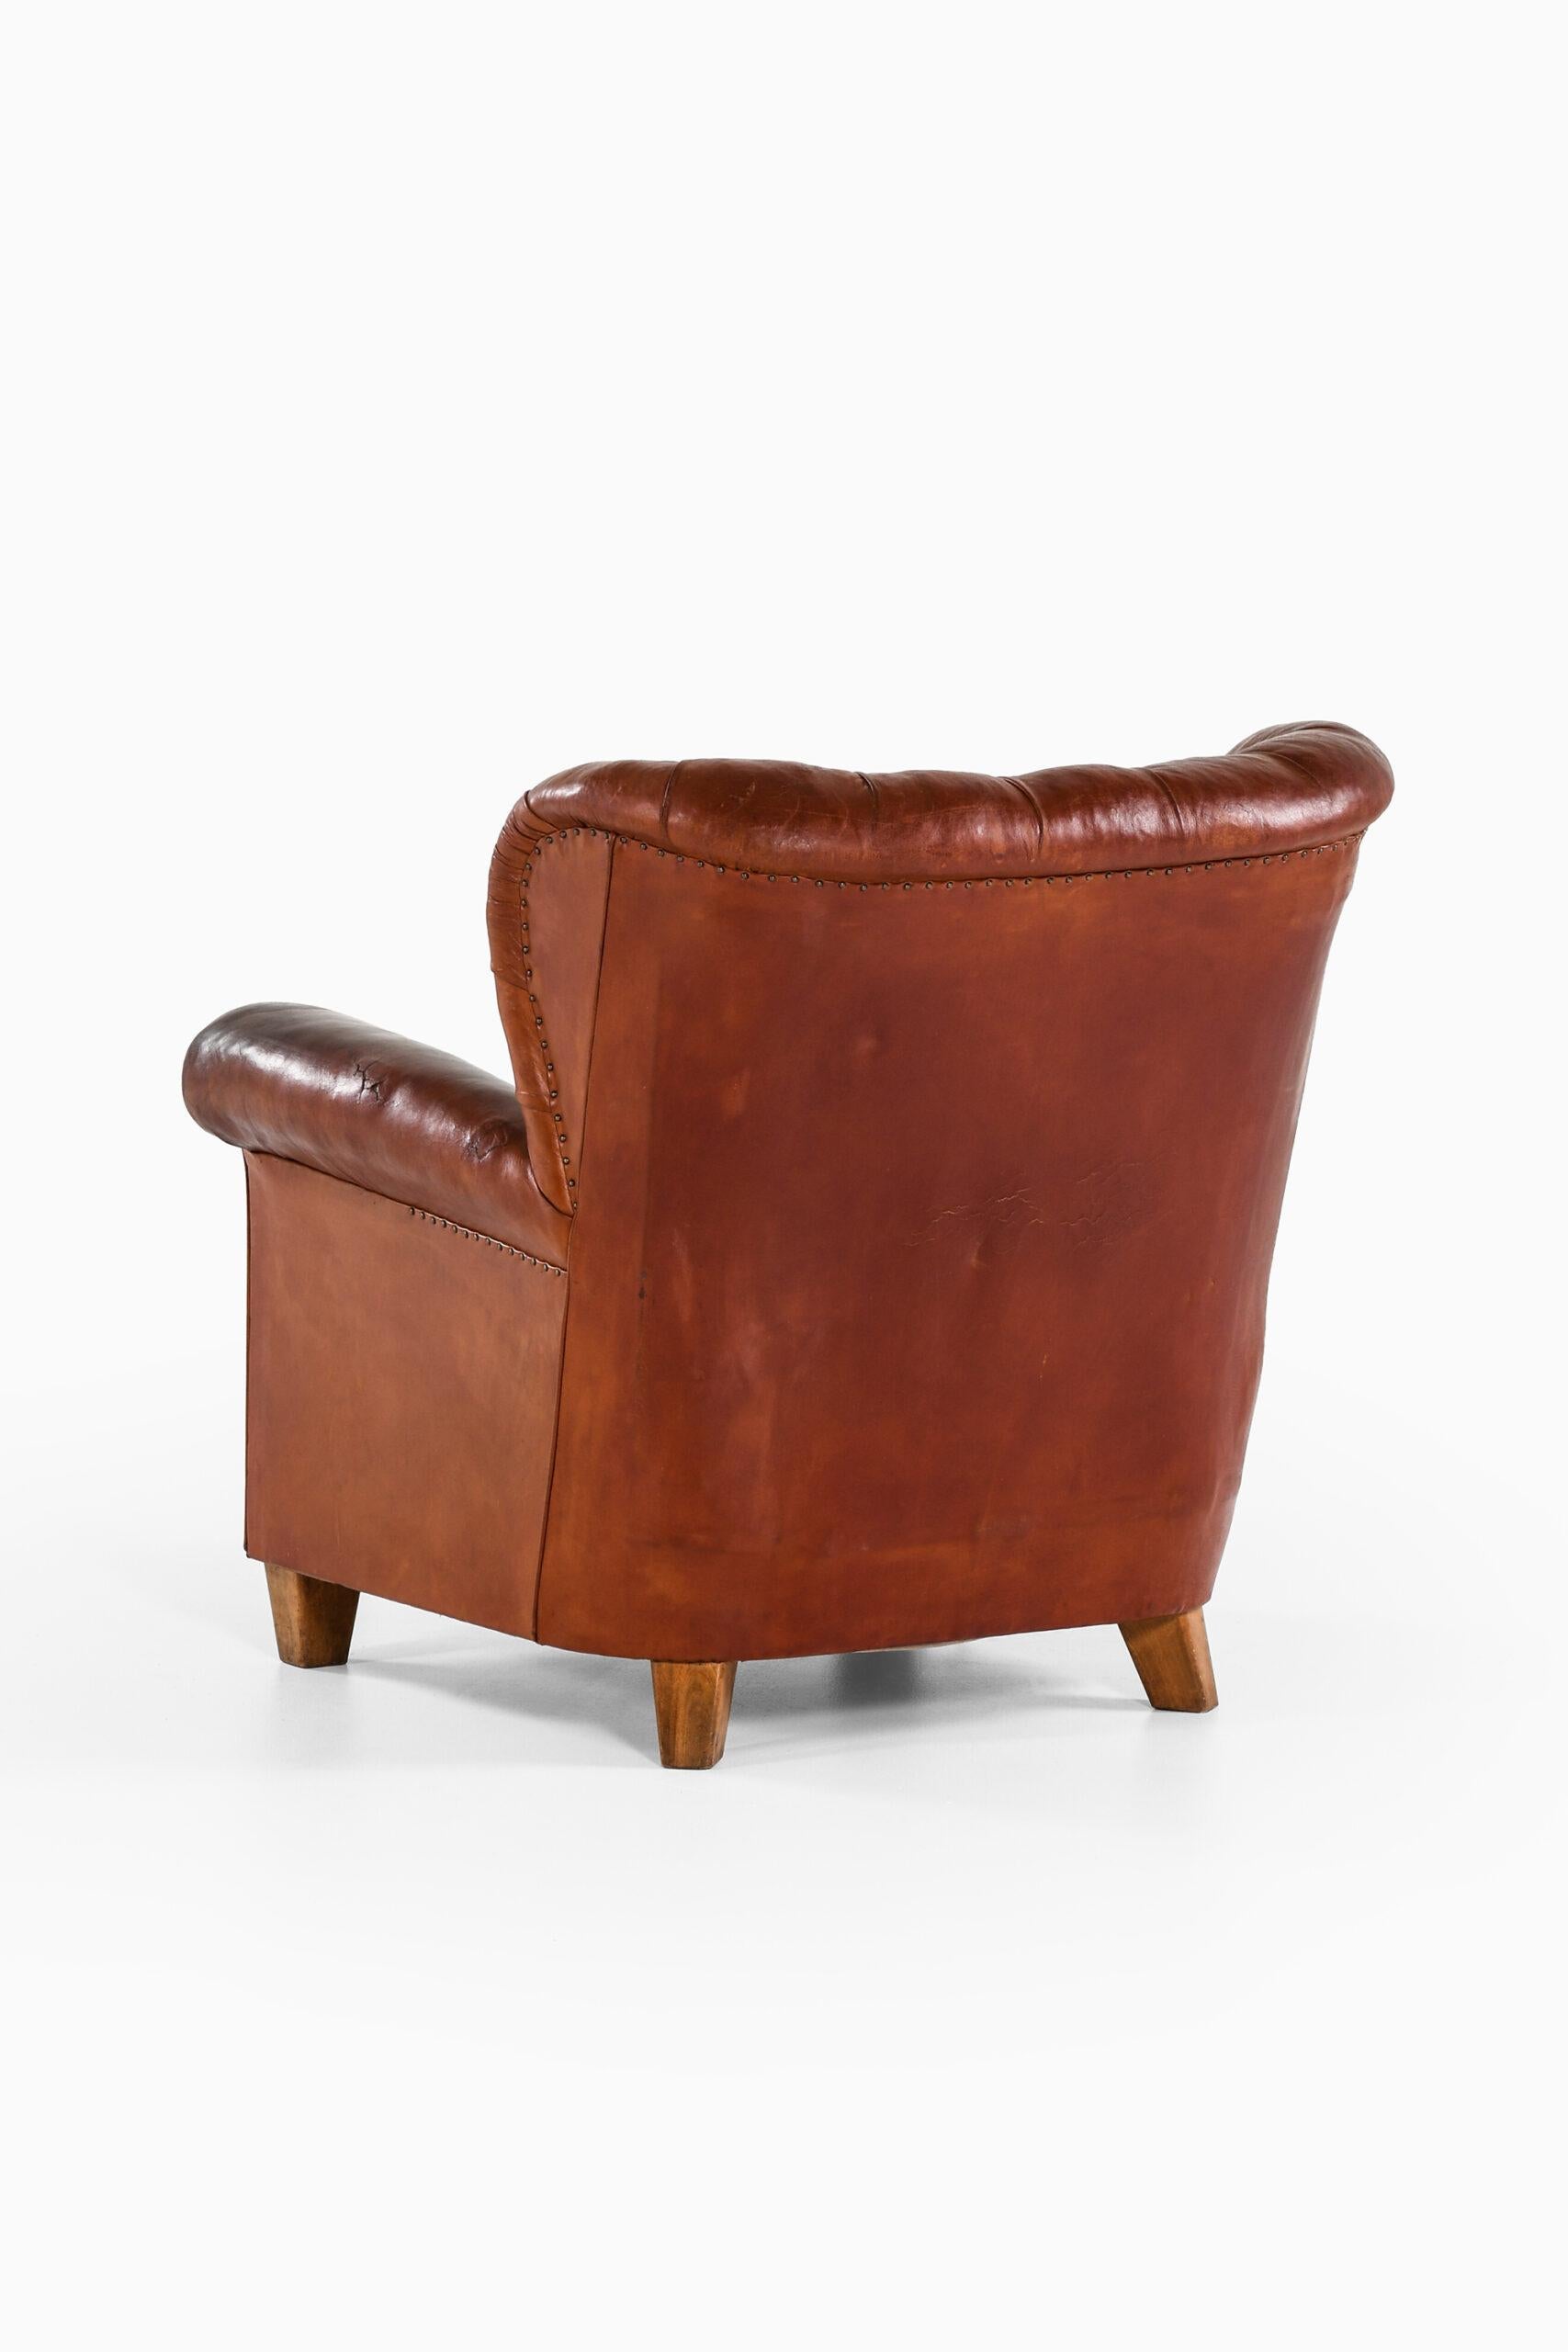 Easy Chair Attributed to Kay Fisker Produced in Denmark For Sale 3